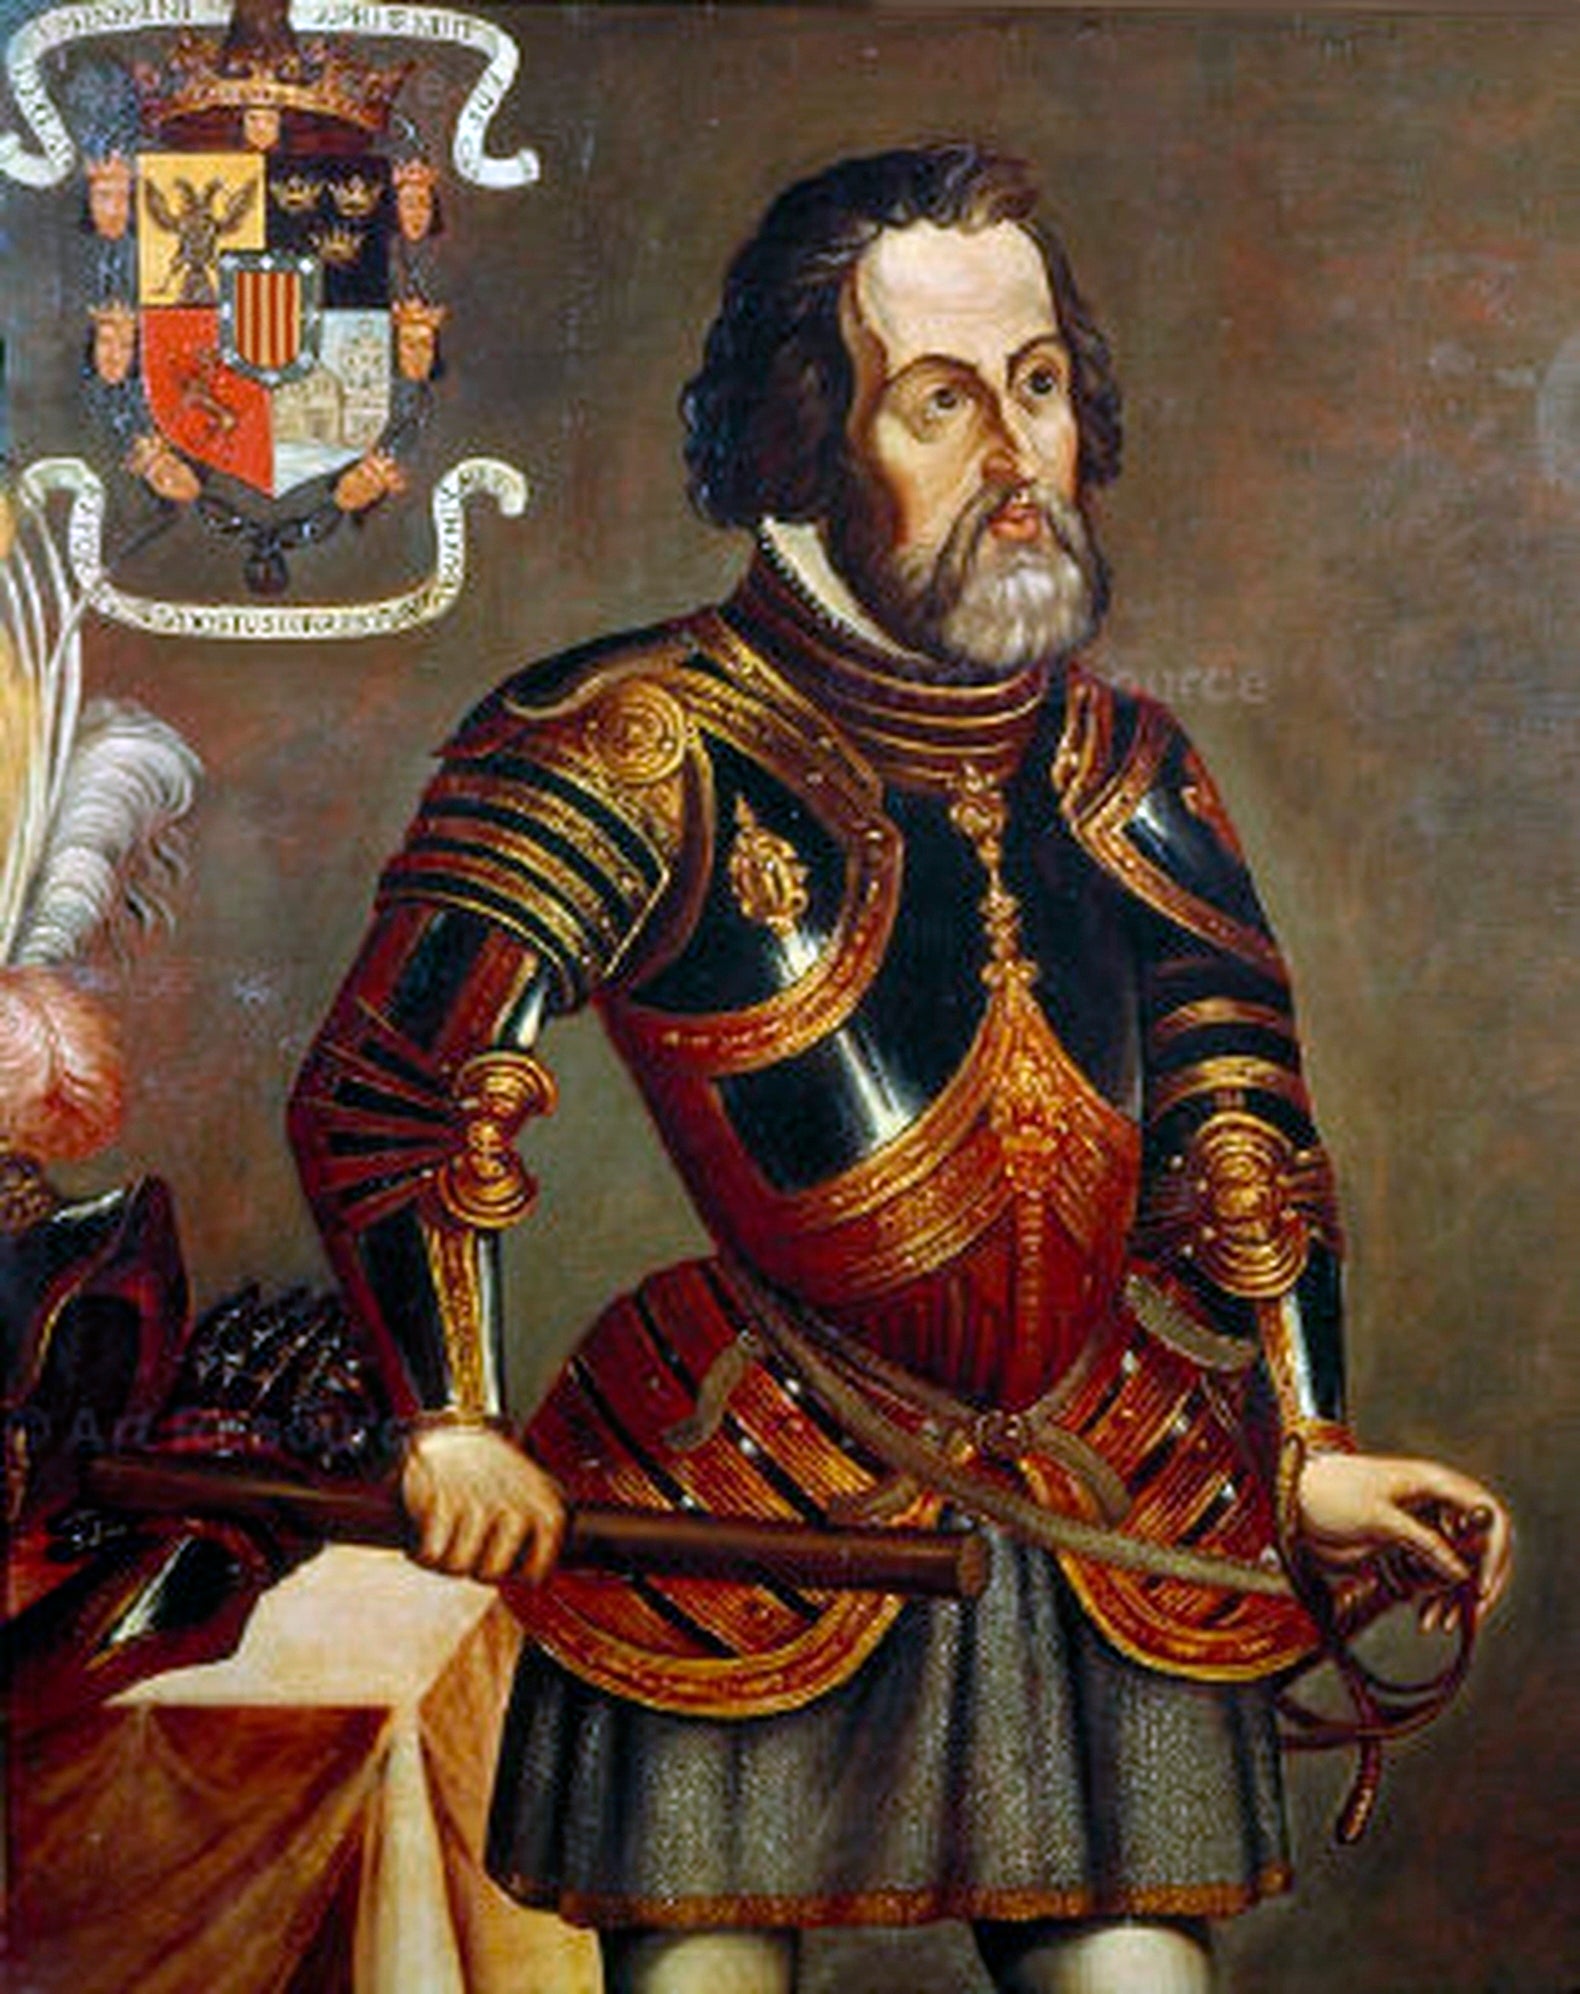 Hernán Cortés, the military adventurer who led Europe's first major military campaign in the New World